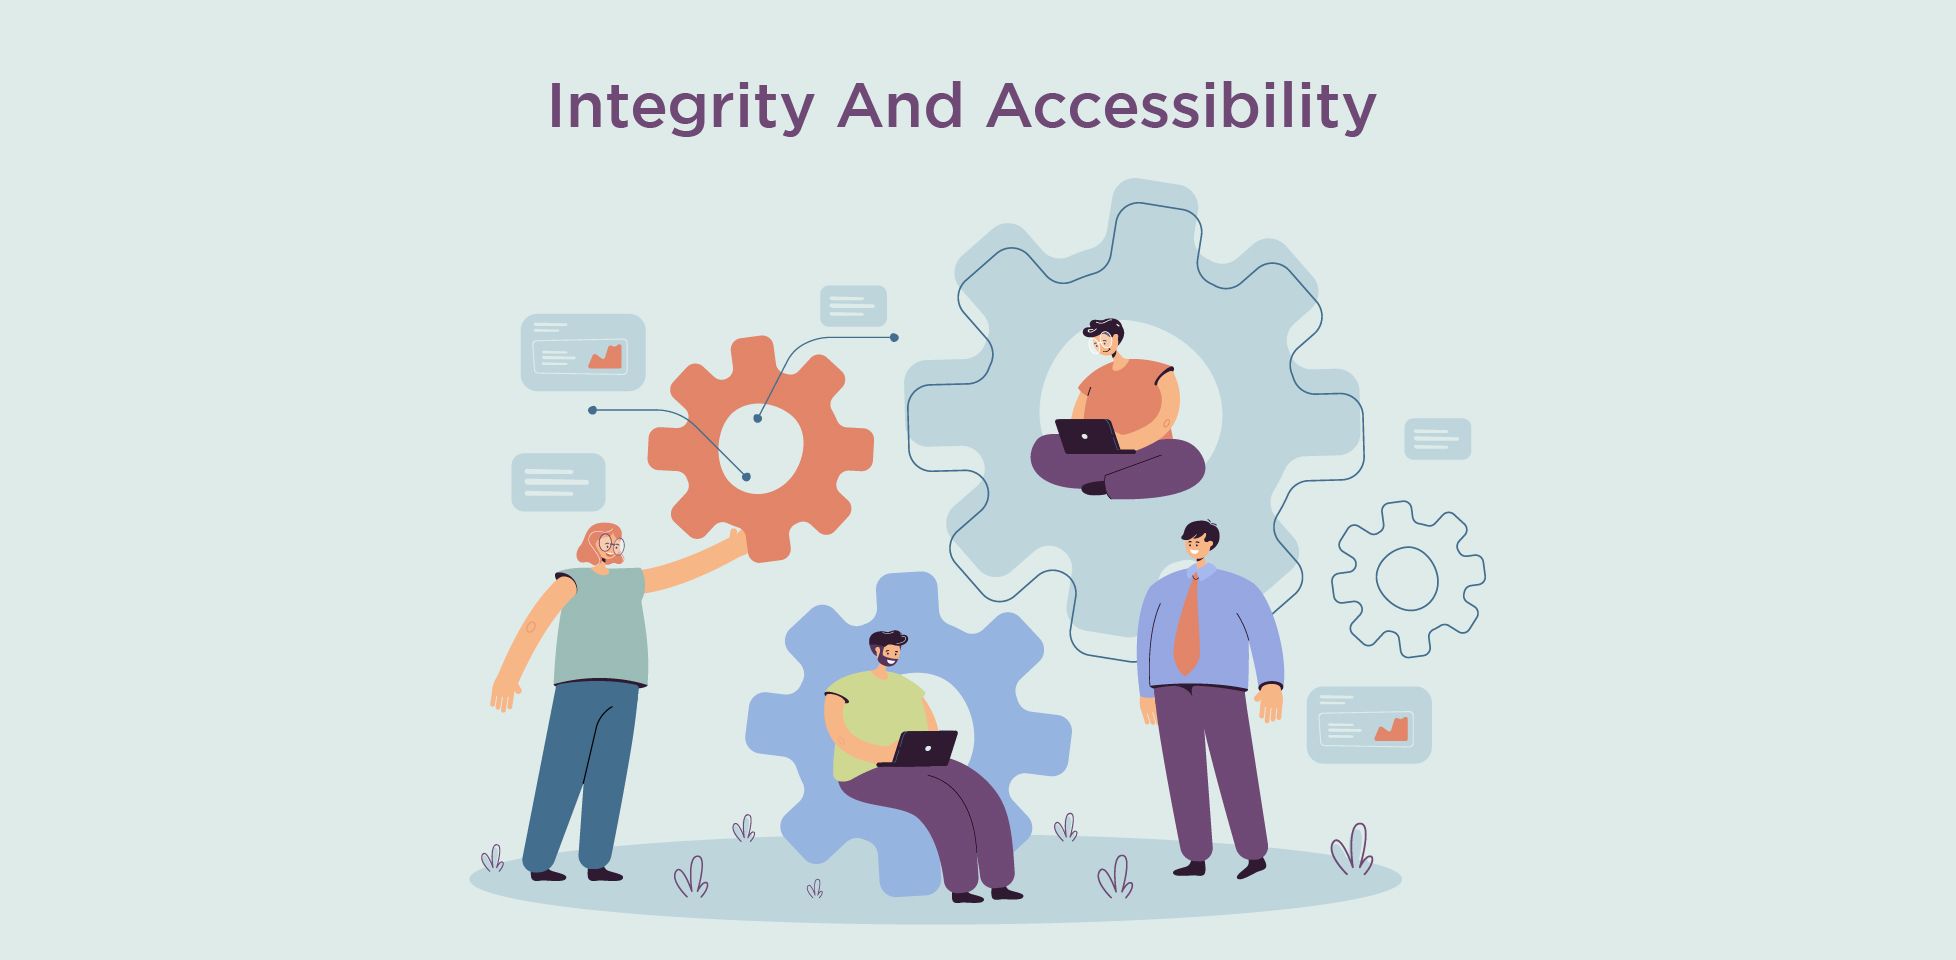 Integrity And Accessibility